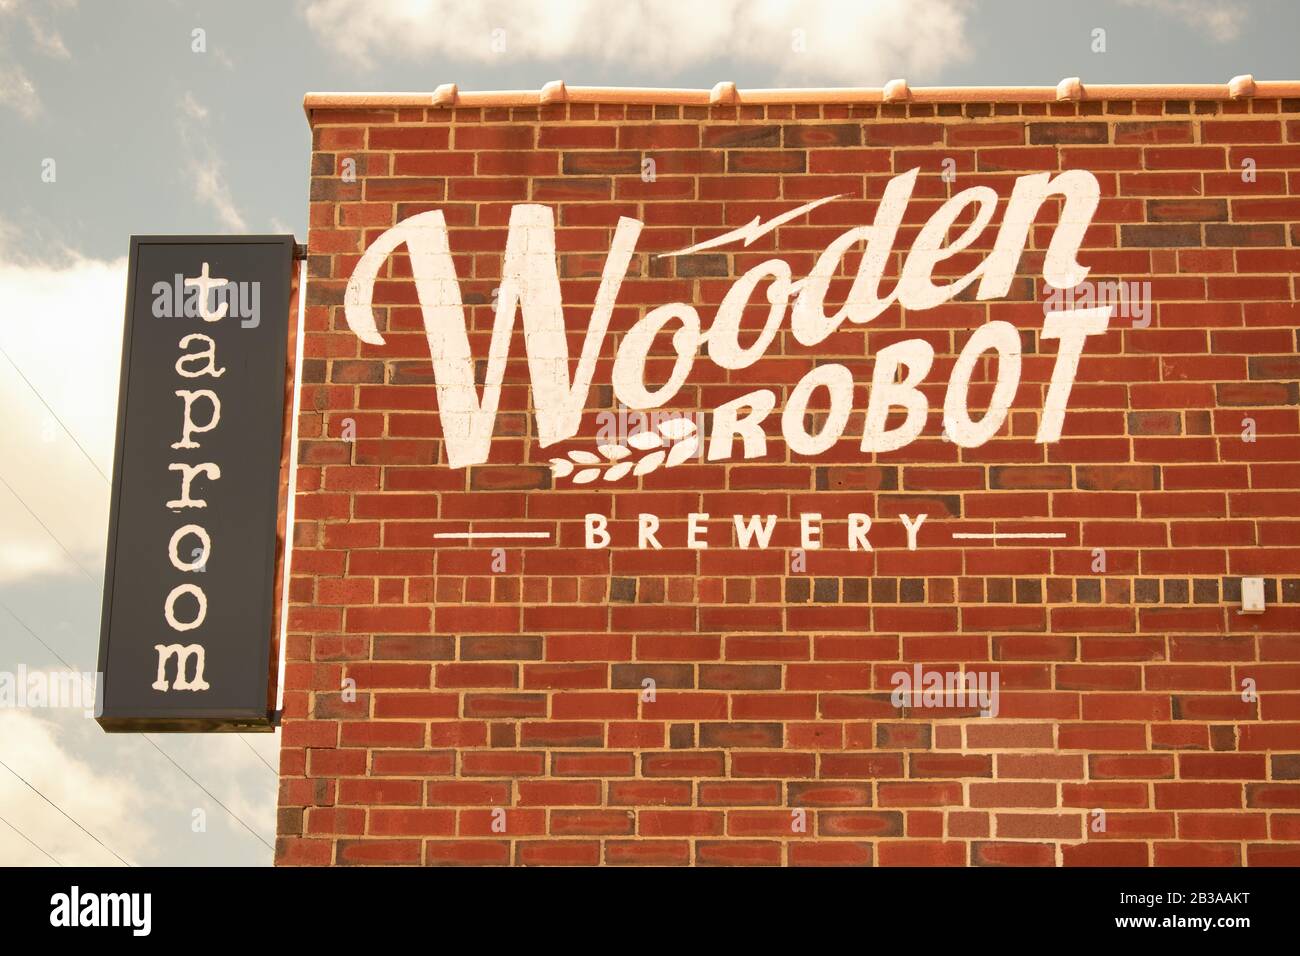 Charlotte, NC/USA - May 14, 2019: Medium closeup of the 'Wooden Robot Brewery' and taproom in South End showing brand/logo and hanging sign. Stock Photo